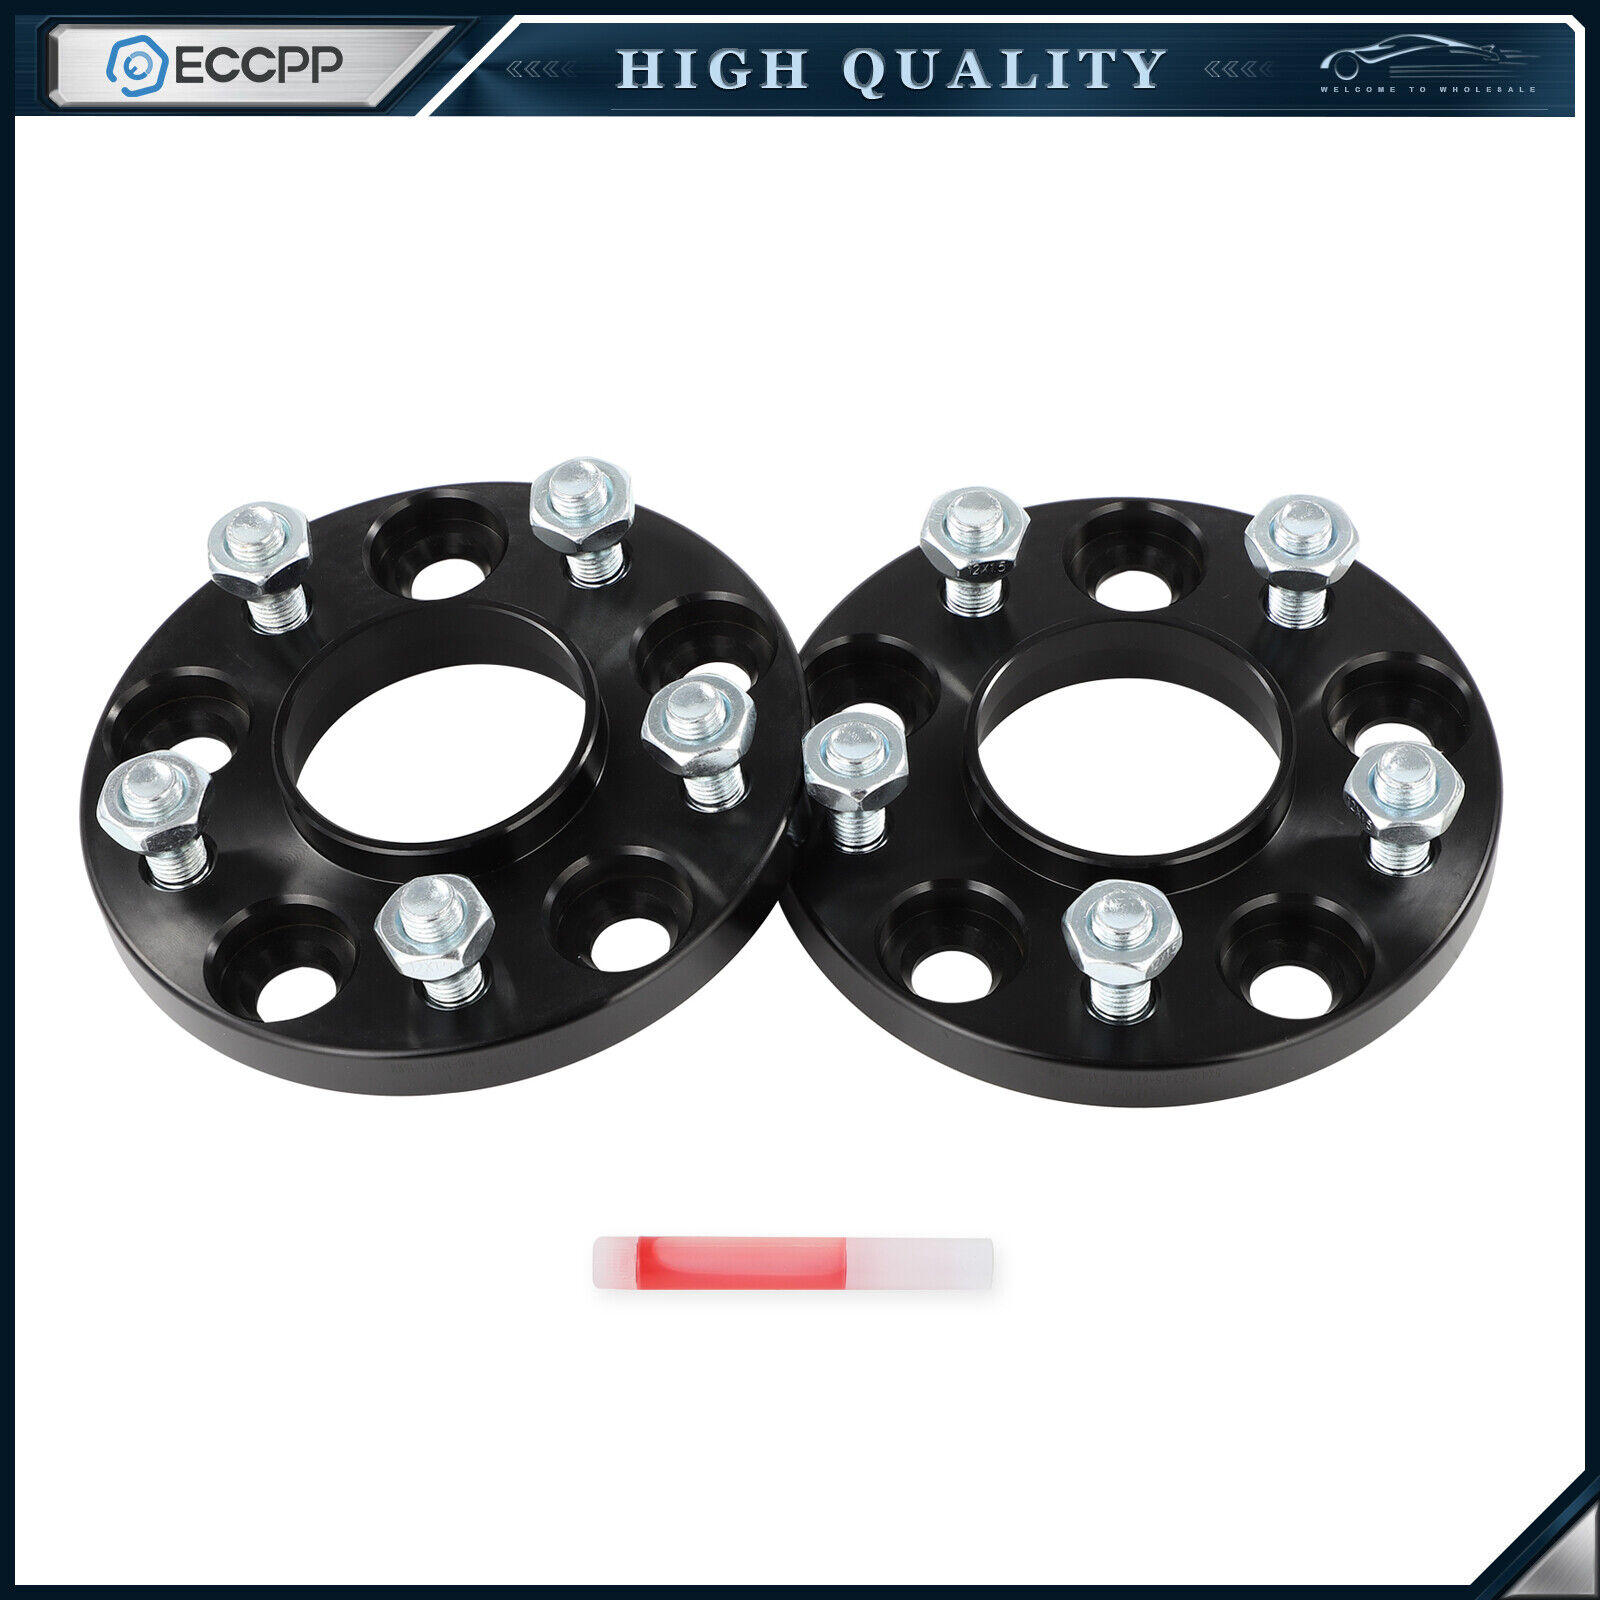 2Pcs 15mm 5x4.5 Hub Centric Wheel Spacers For Hyundai Genesis Coupe Veloster